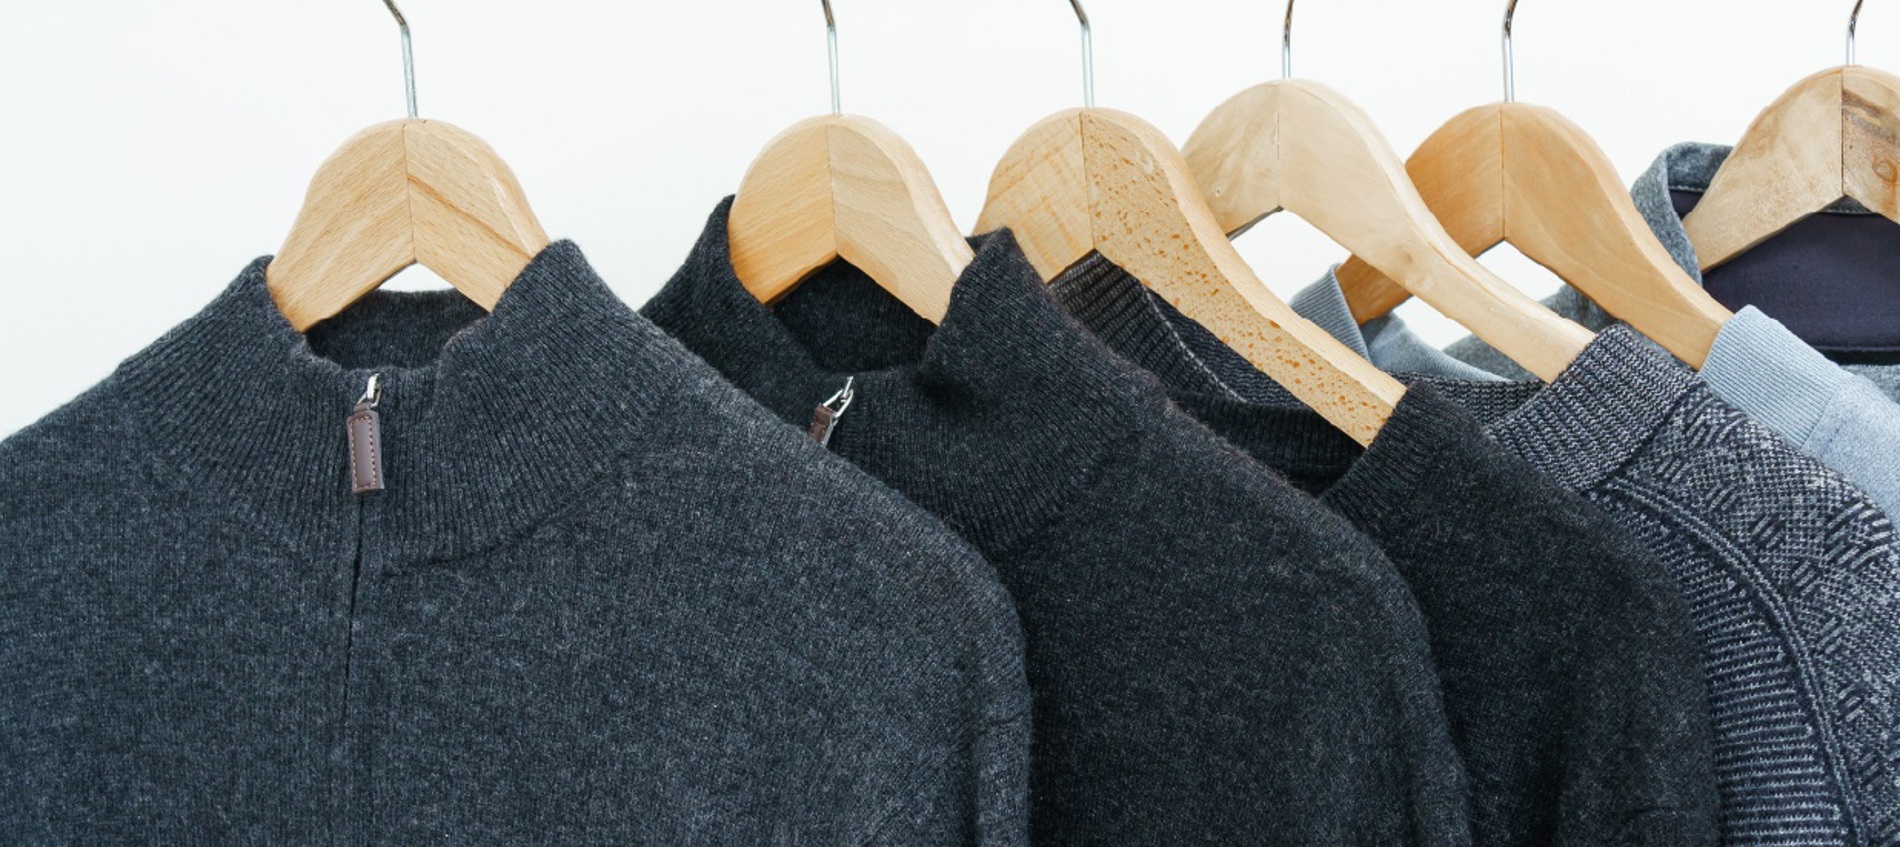 Luxurious cashmere jumpers